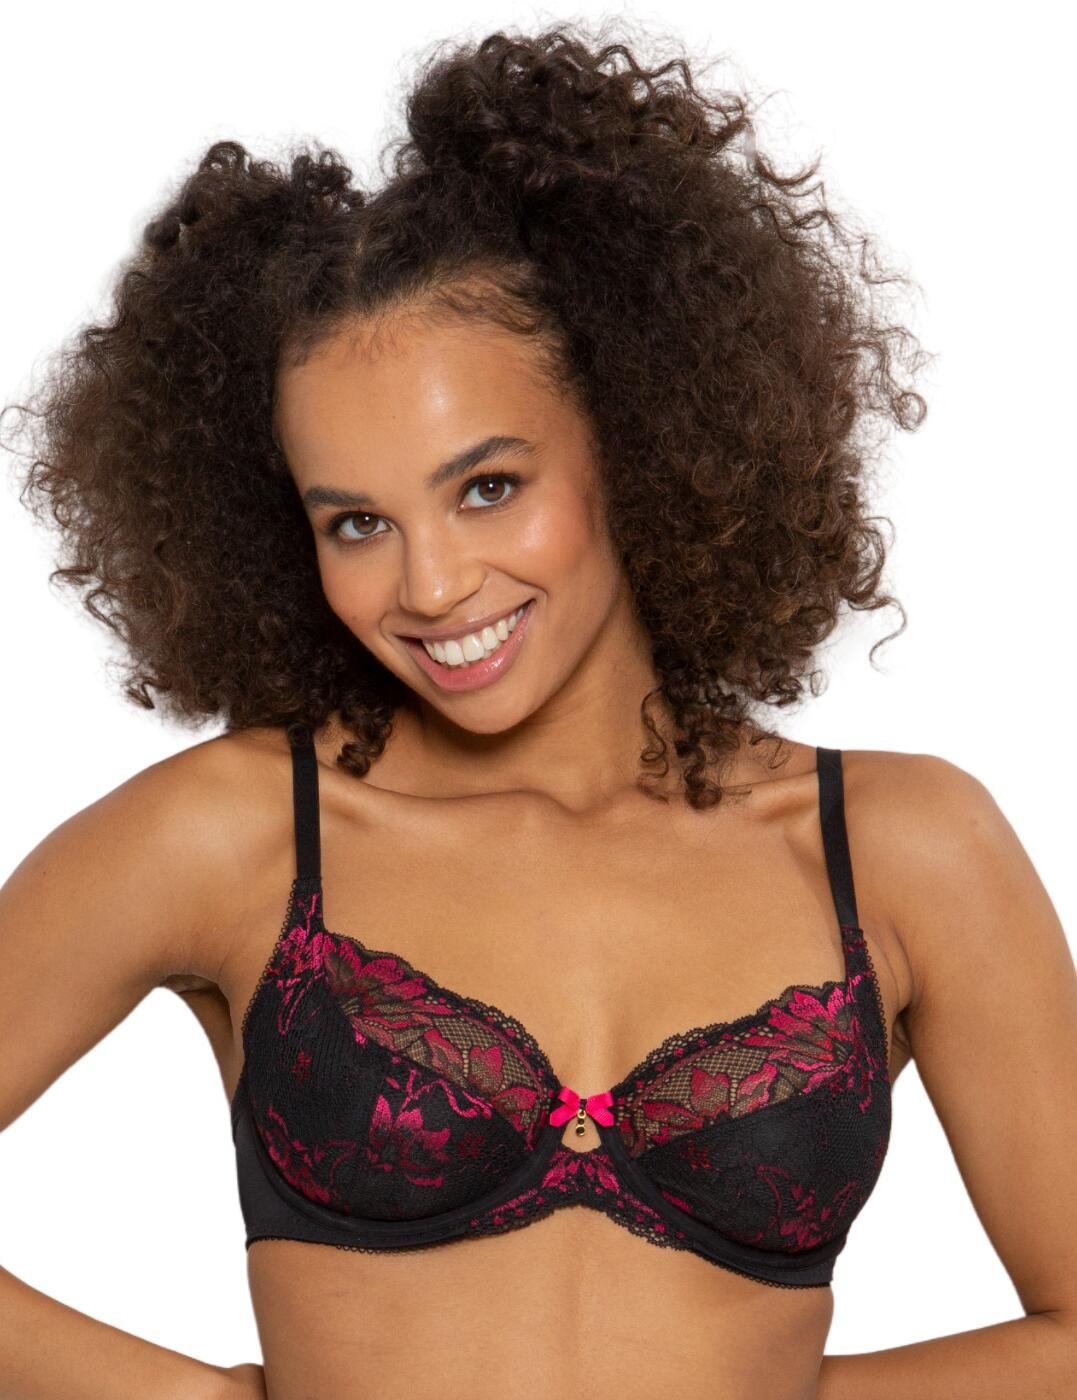 Cup Size J Underwired Bras, Lingerie